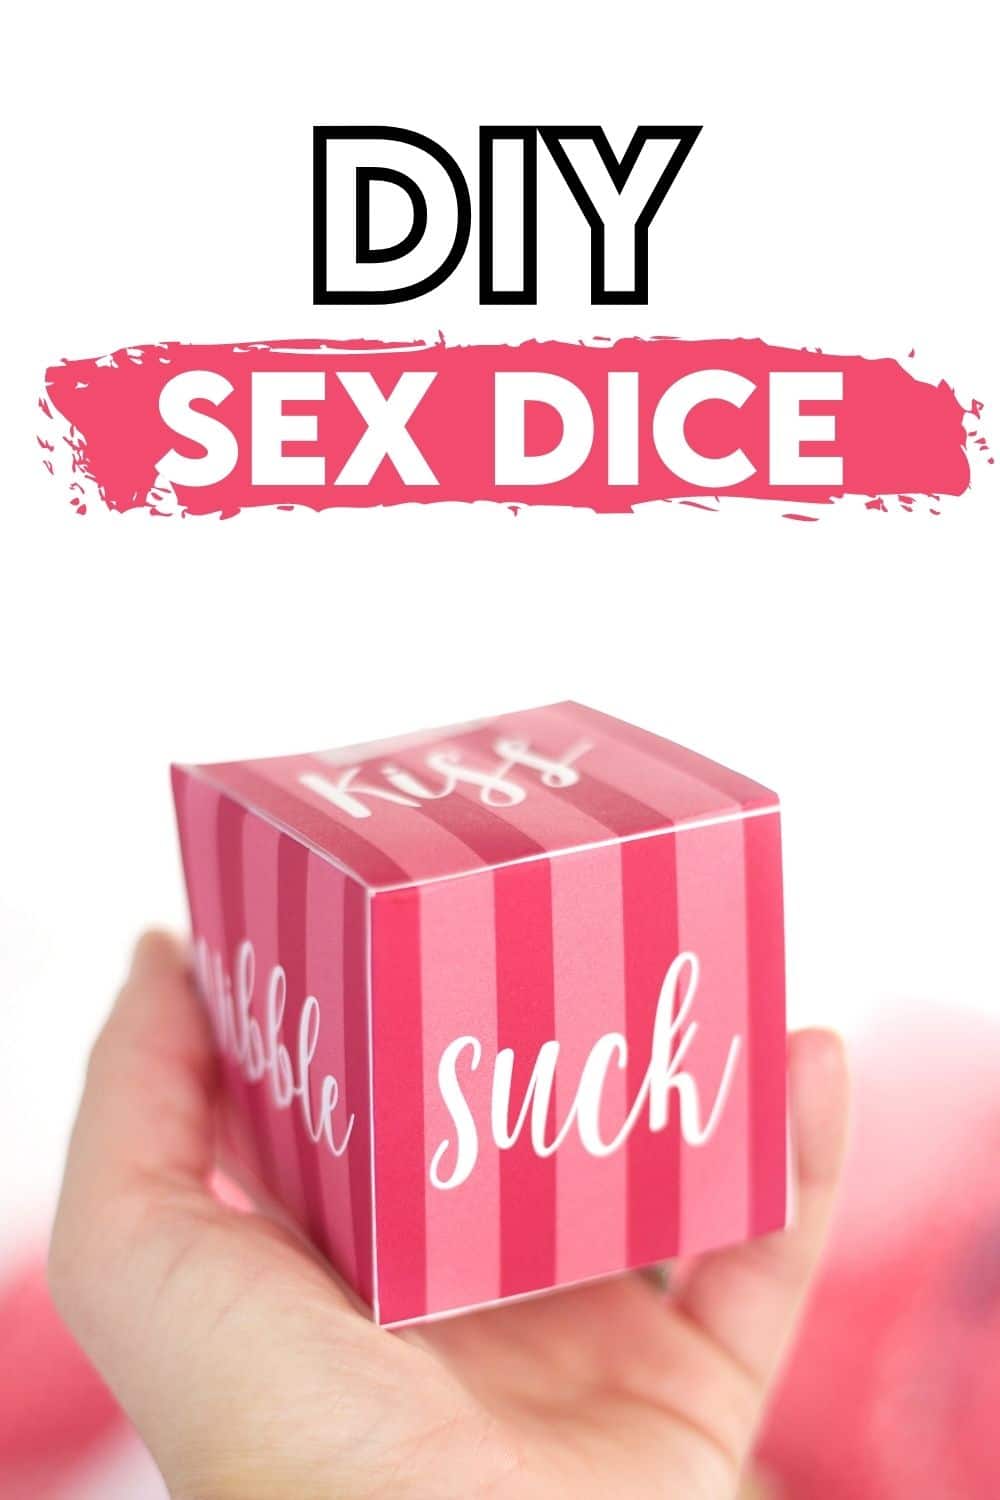 5 Free Sex Dice to Spice Things Up in